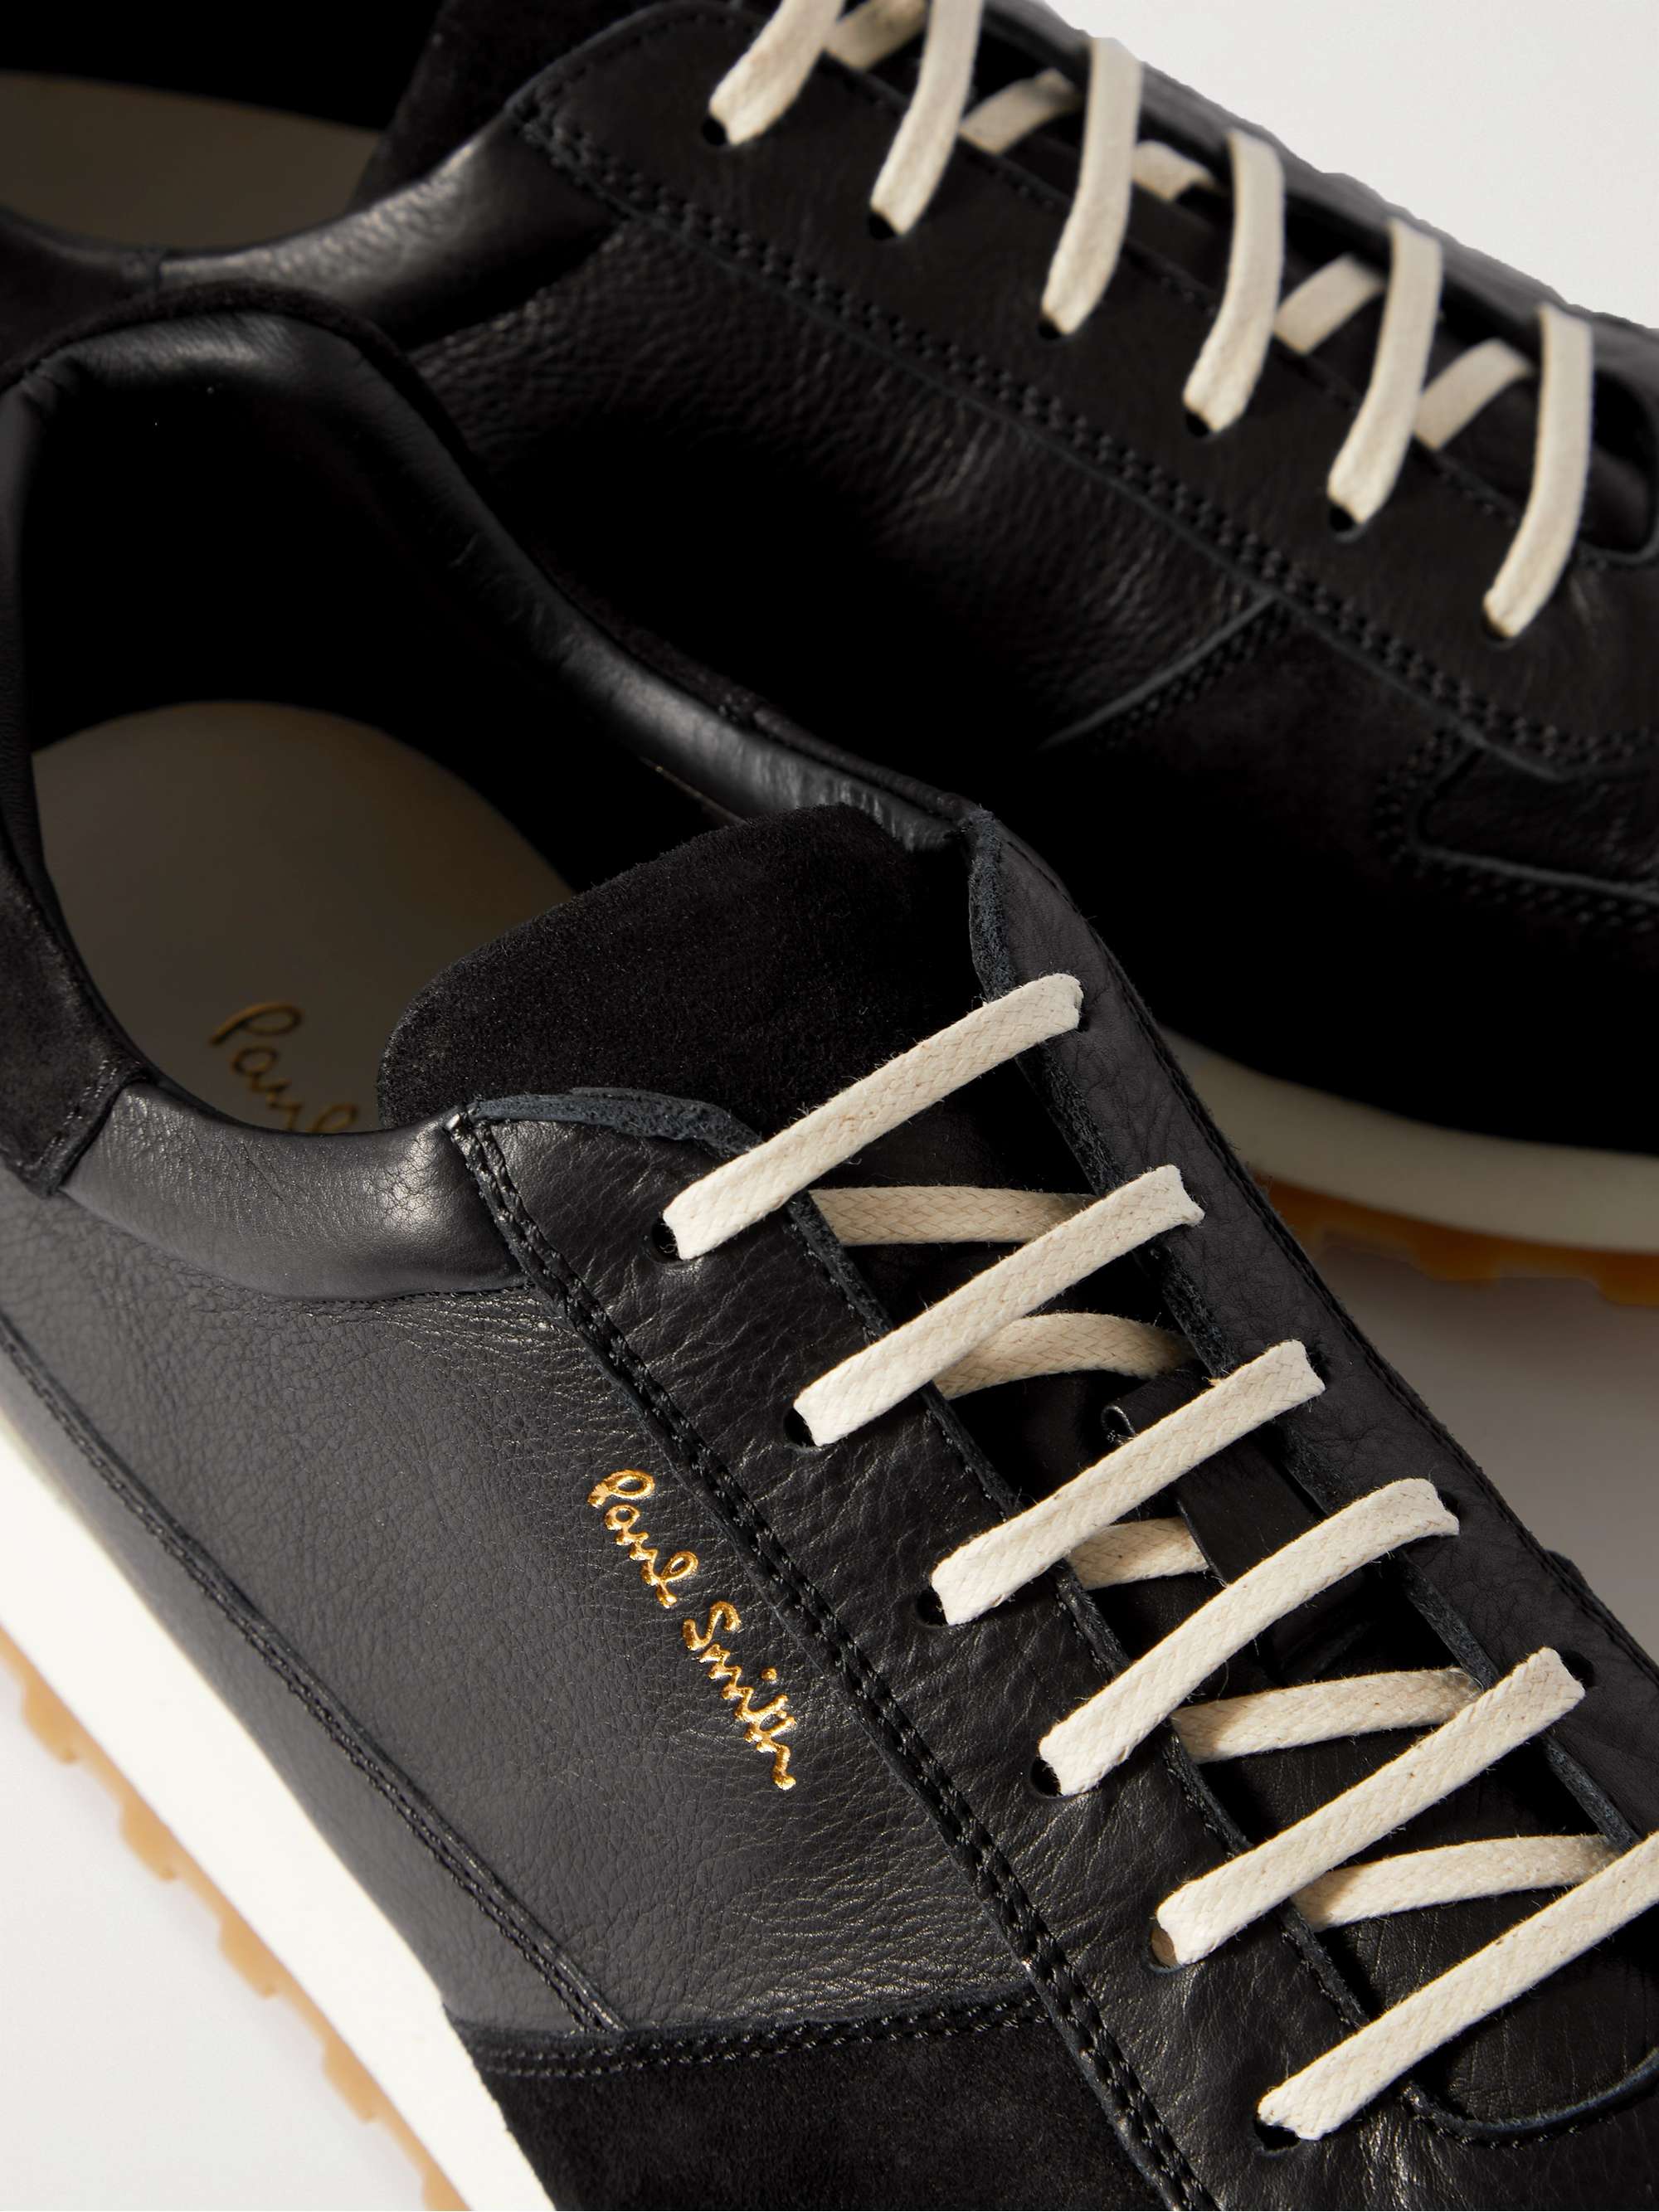 PAUL SMITH Velo Full-Grain Leather and Suede Sneakers